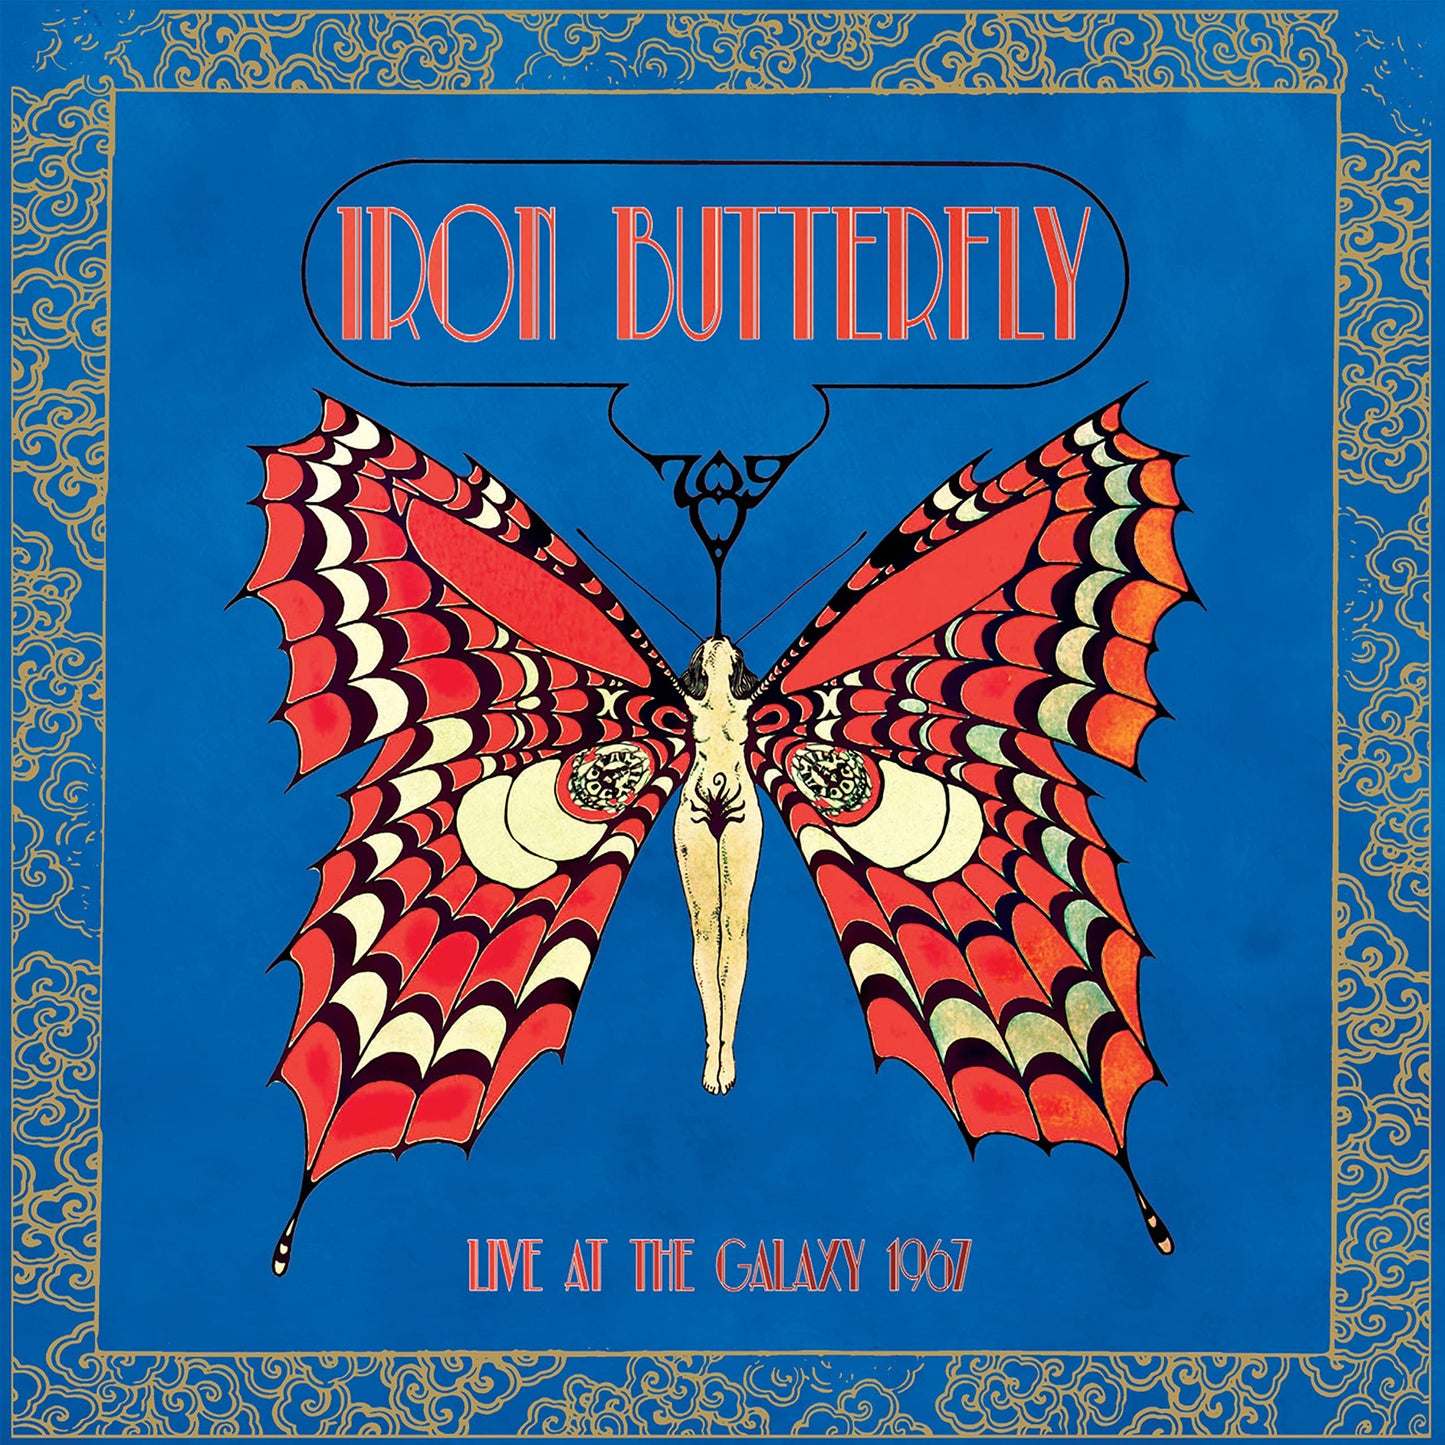 Iron Butterfly - Live at the Galaxy 1967 - Import CD Digipak